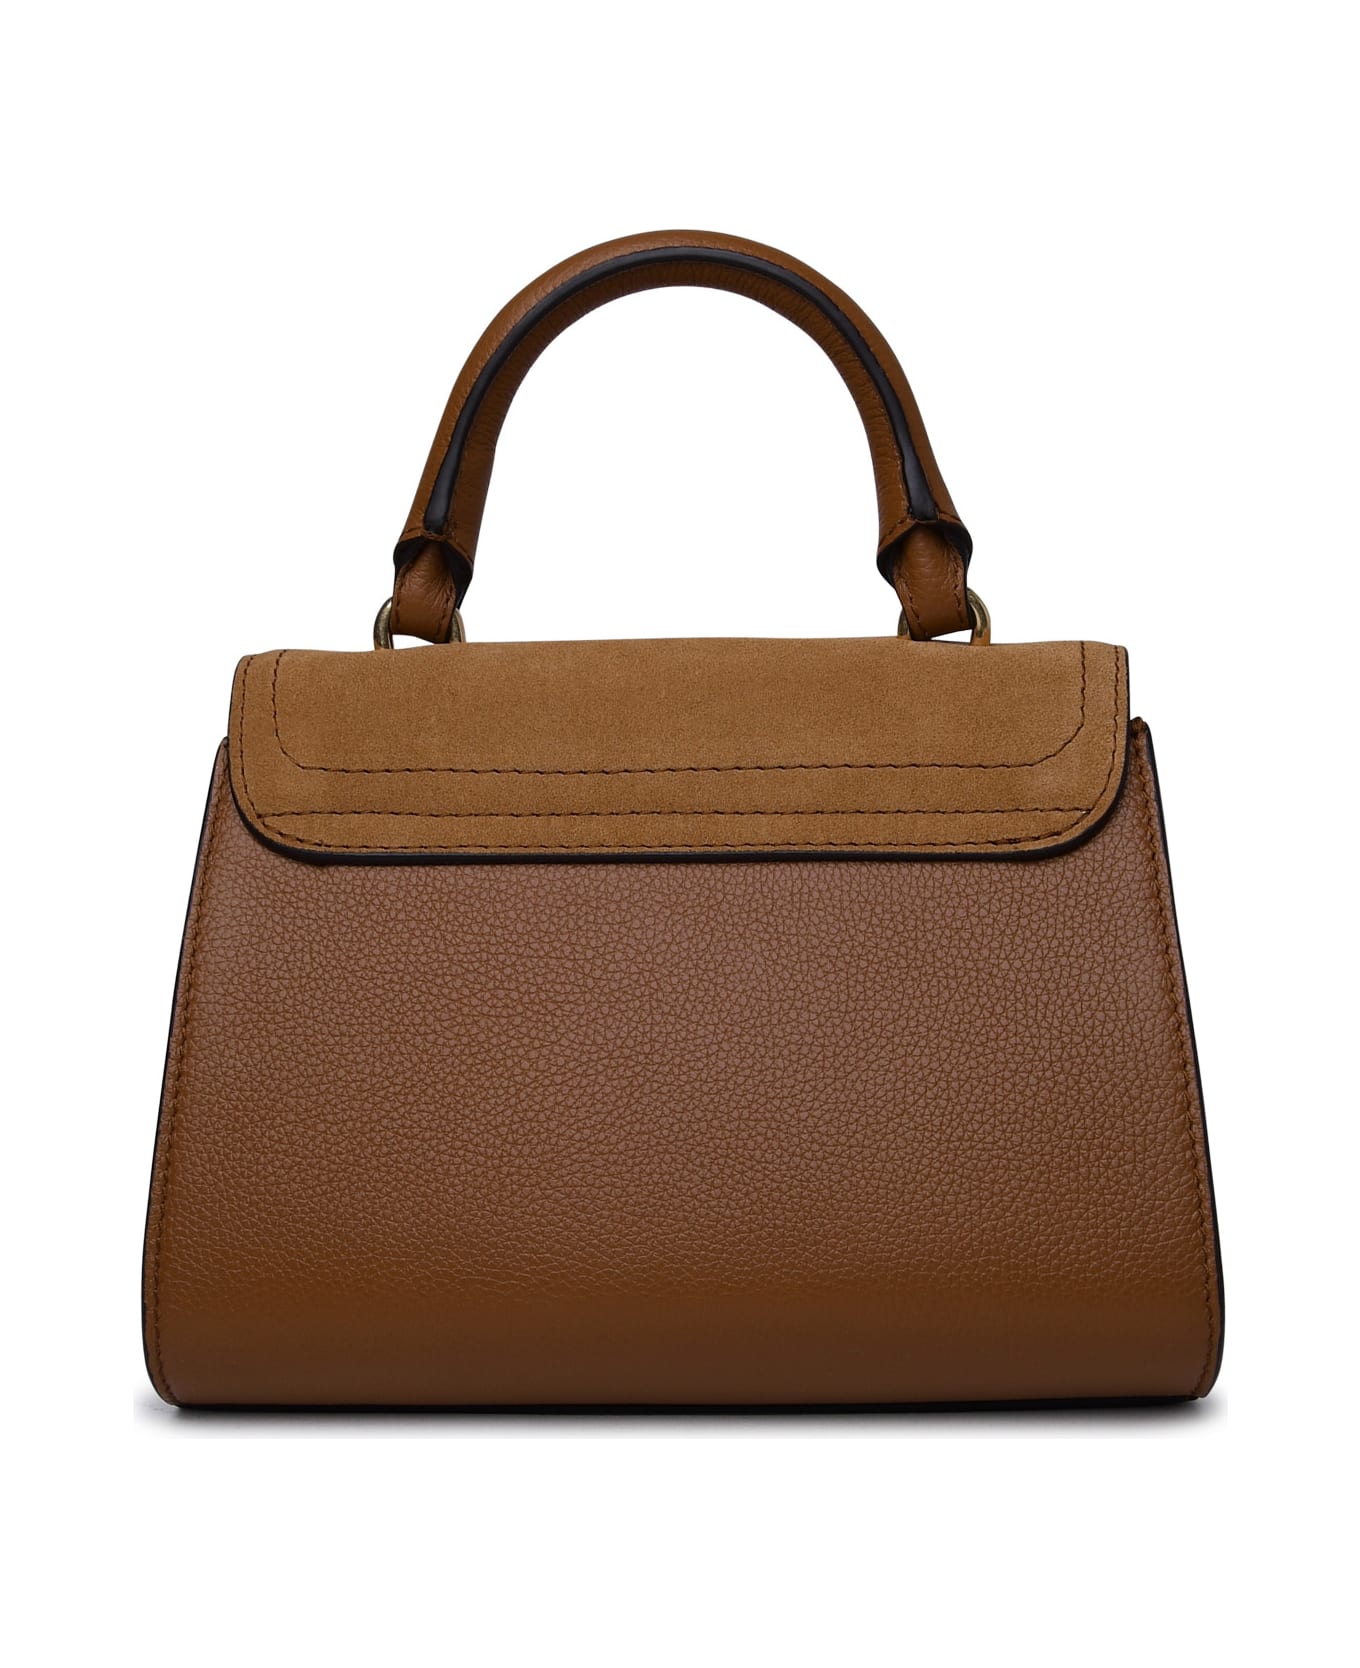 See by Chloé Brown Leather Bag - Brown トートバッグ